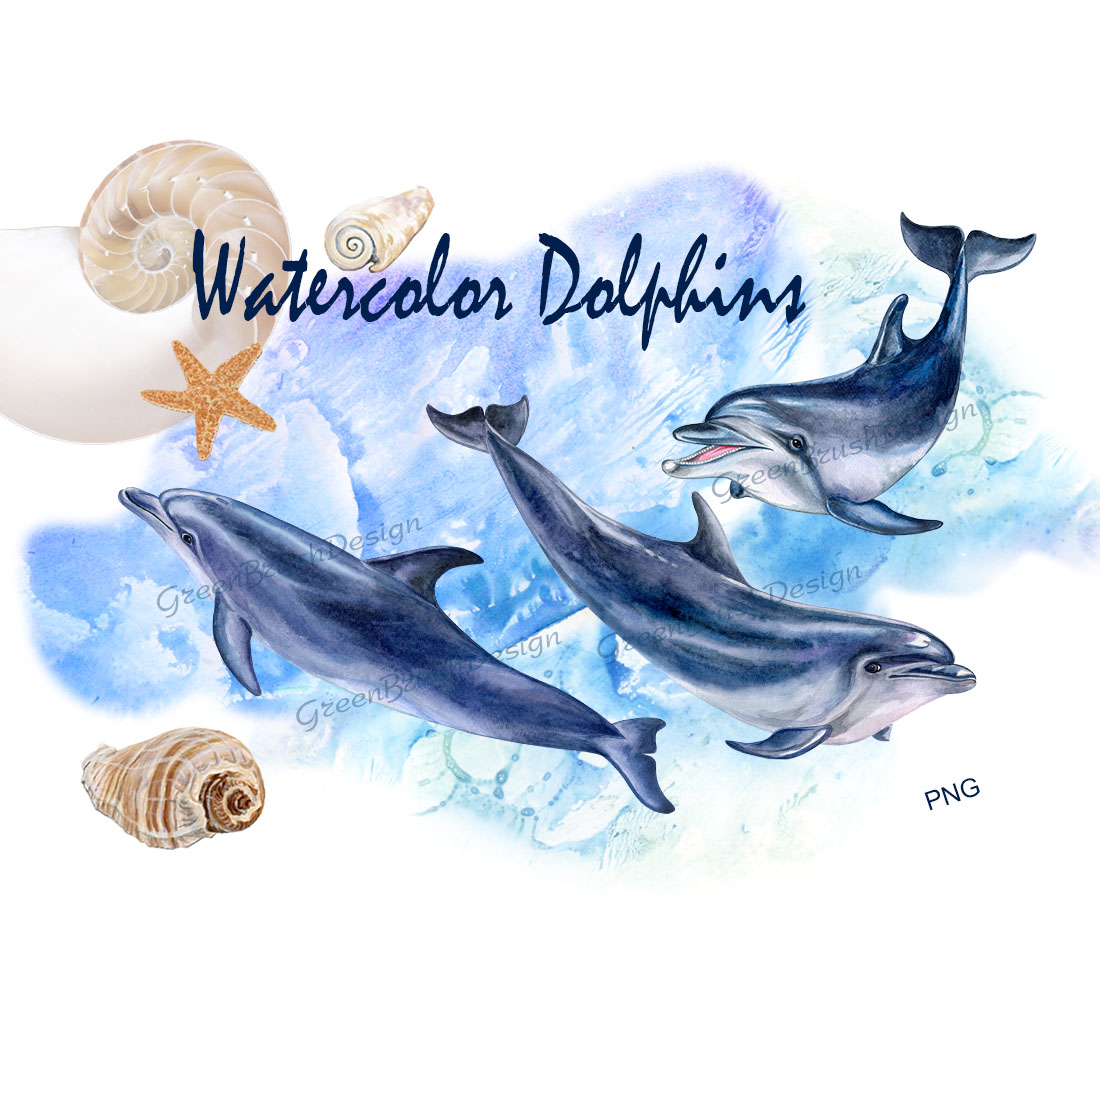 Watercolor Dolphin Digital Clipart cover image.